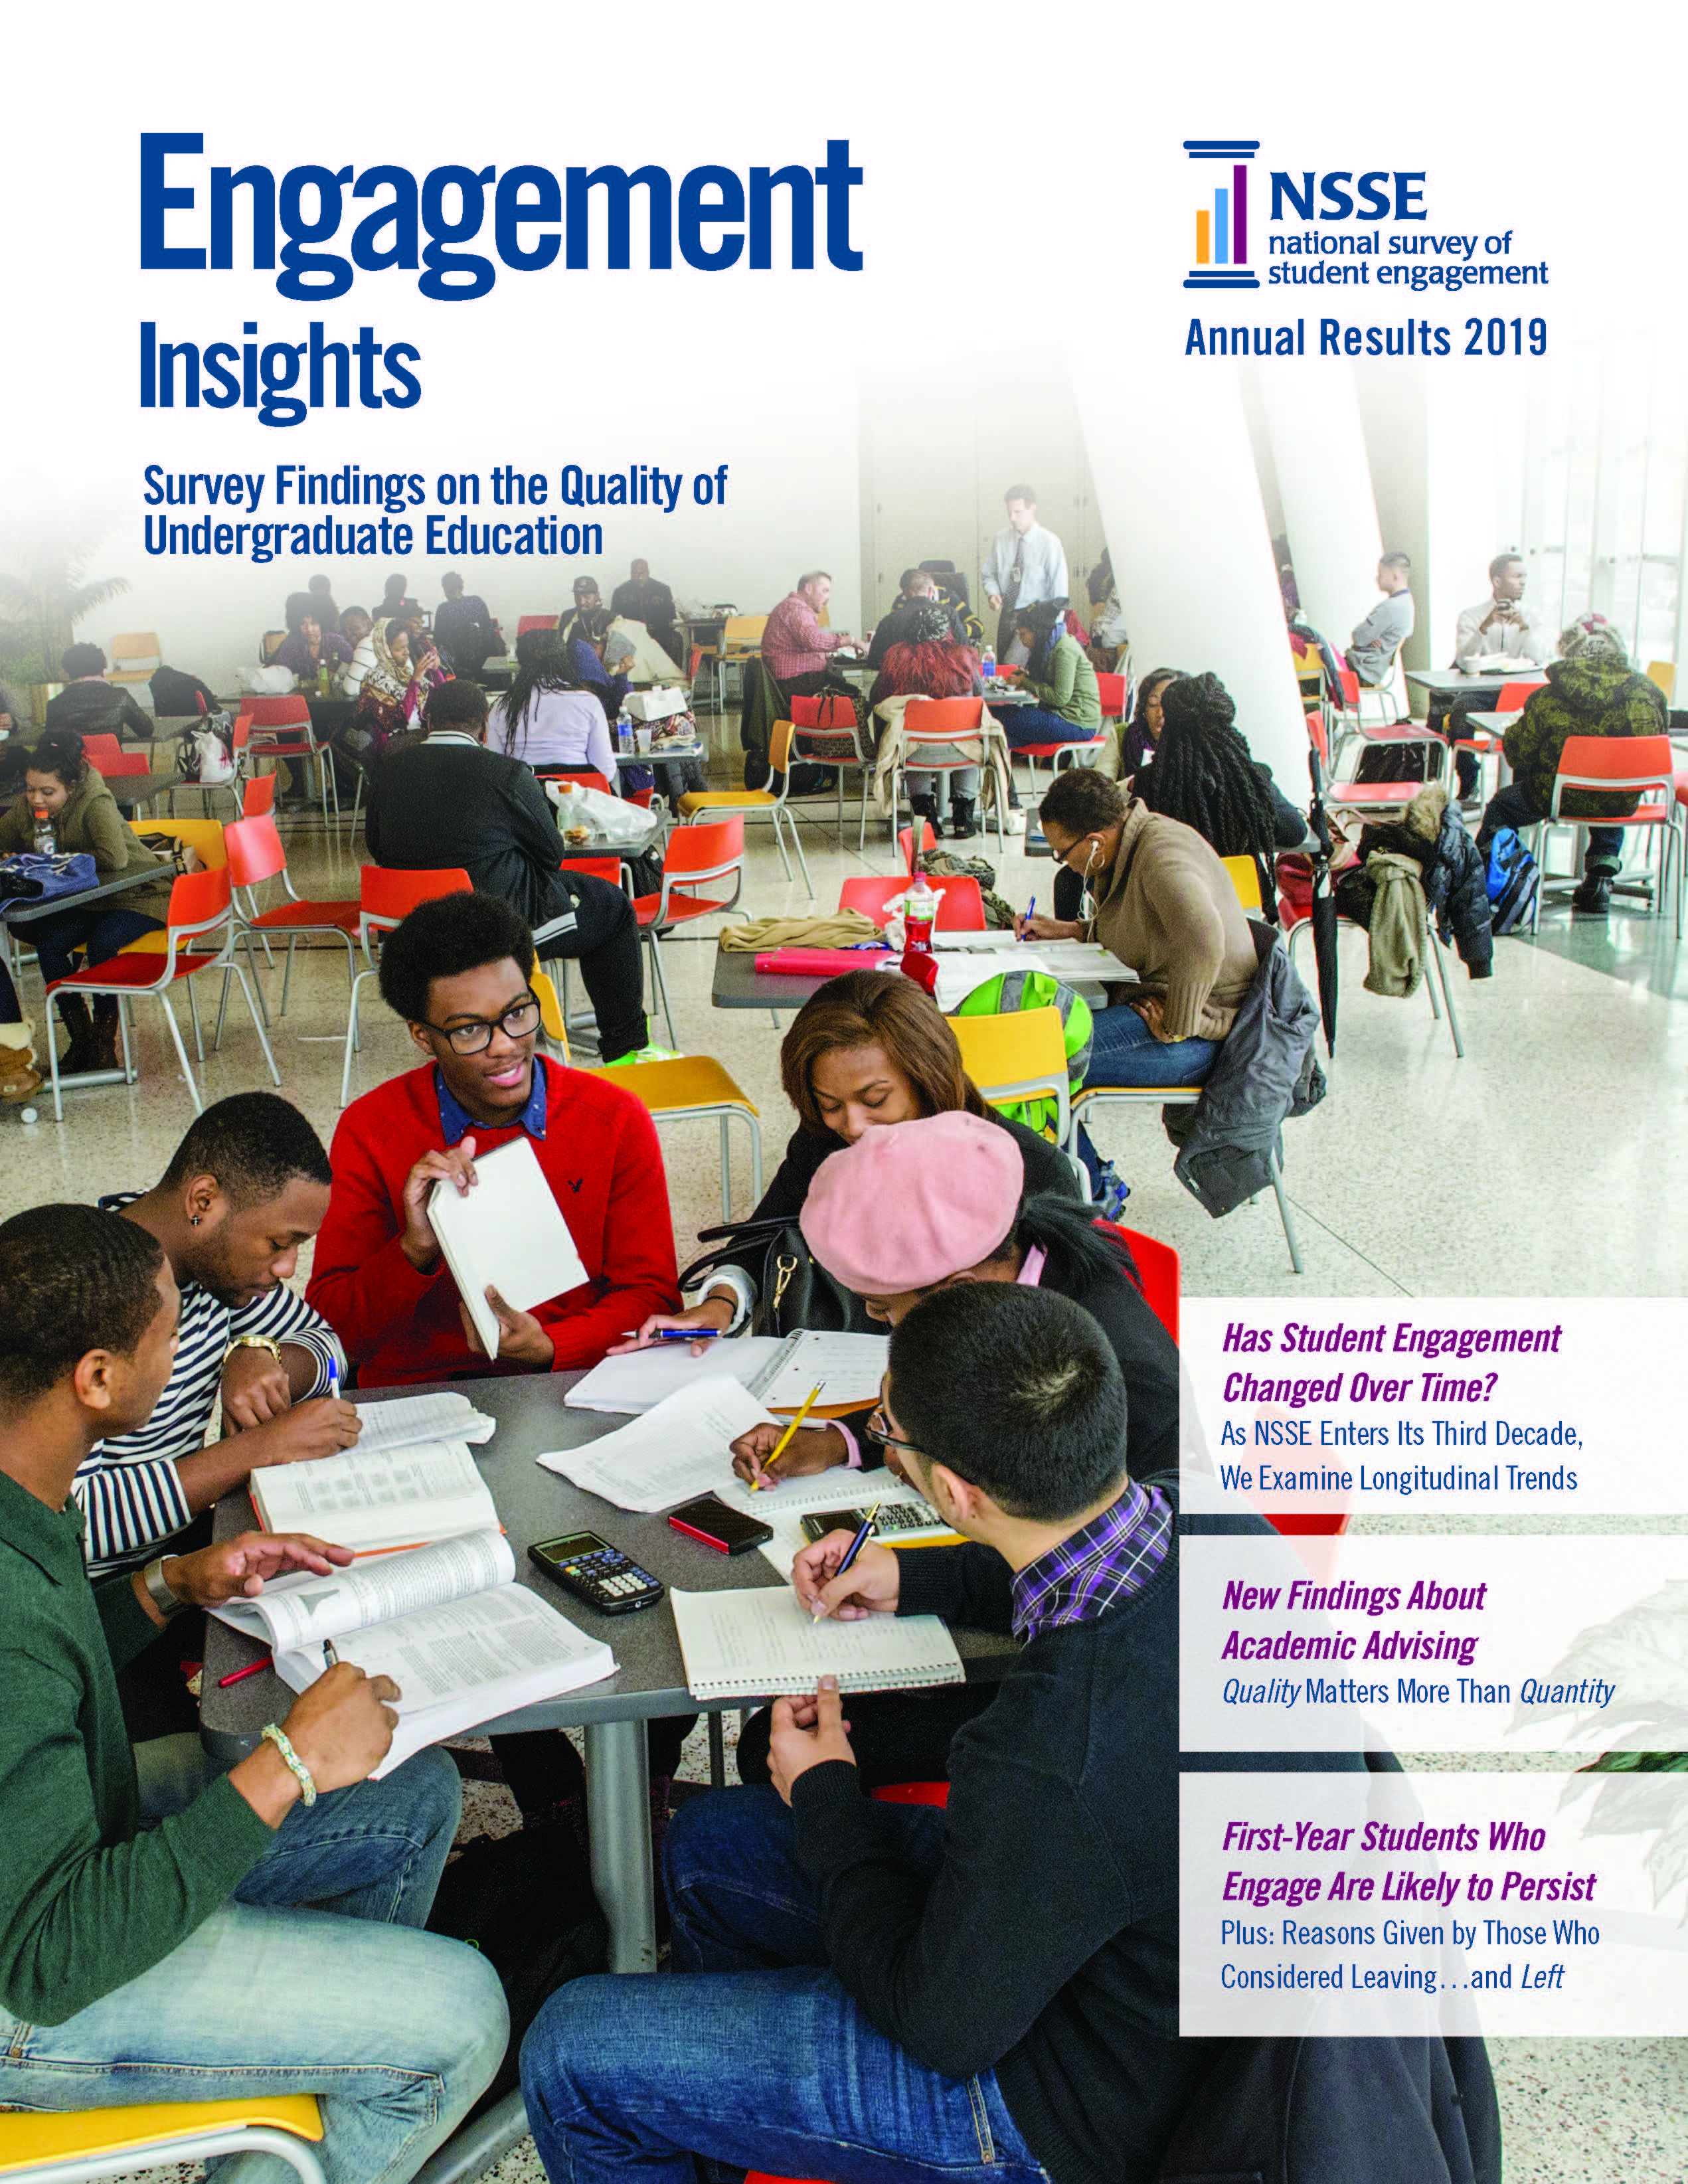 front cover of NSSE Annual Results 2019 Engagement Insights: Survey Findings on the Quality of Undergraduate Education